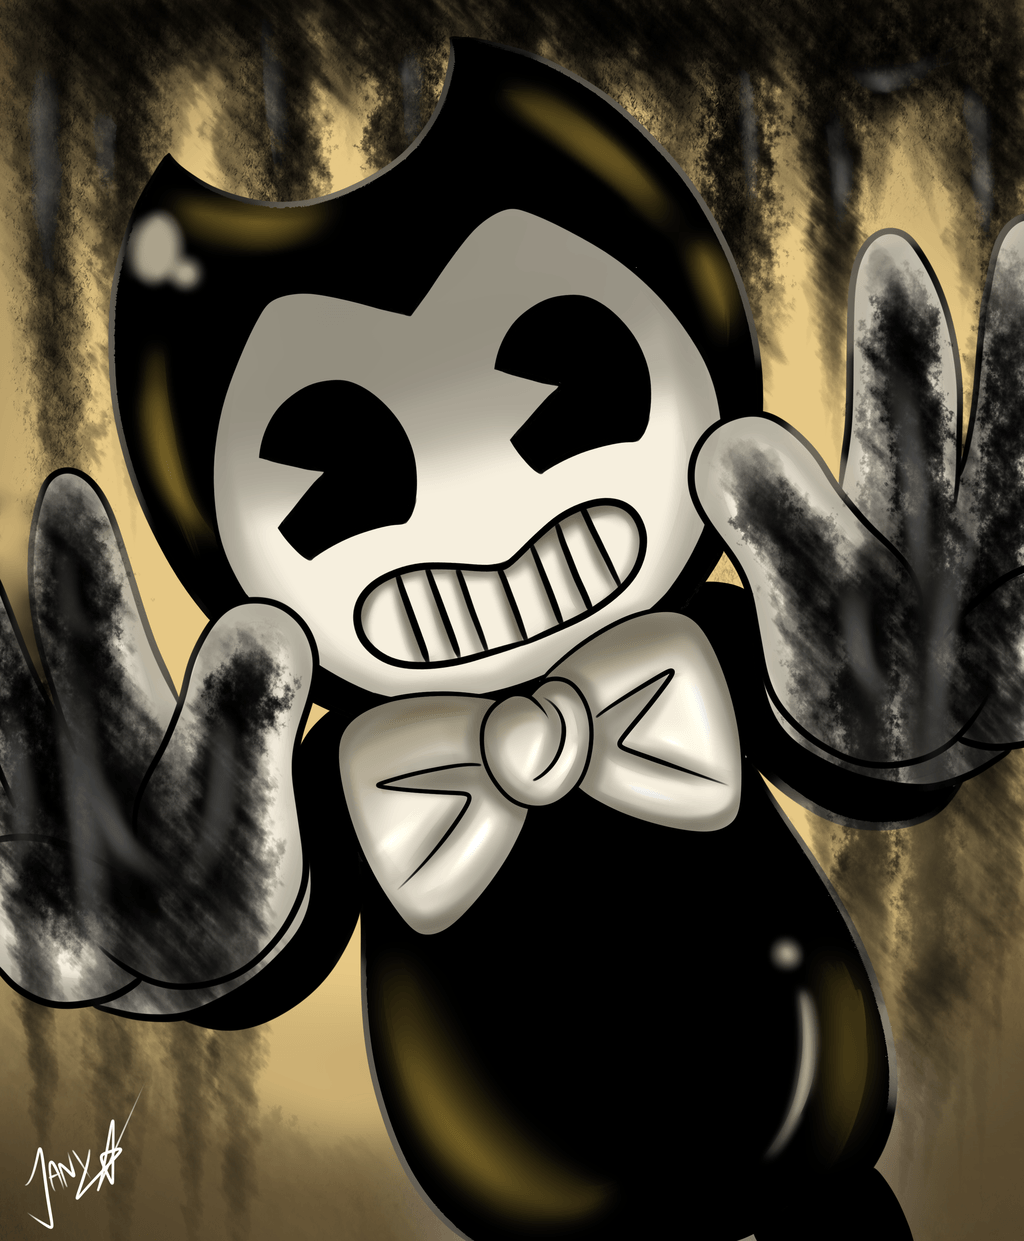 Bendy And The Ink Machine by Jany